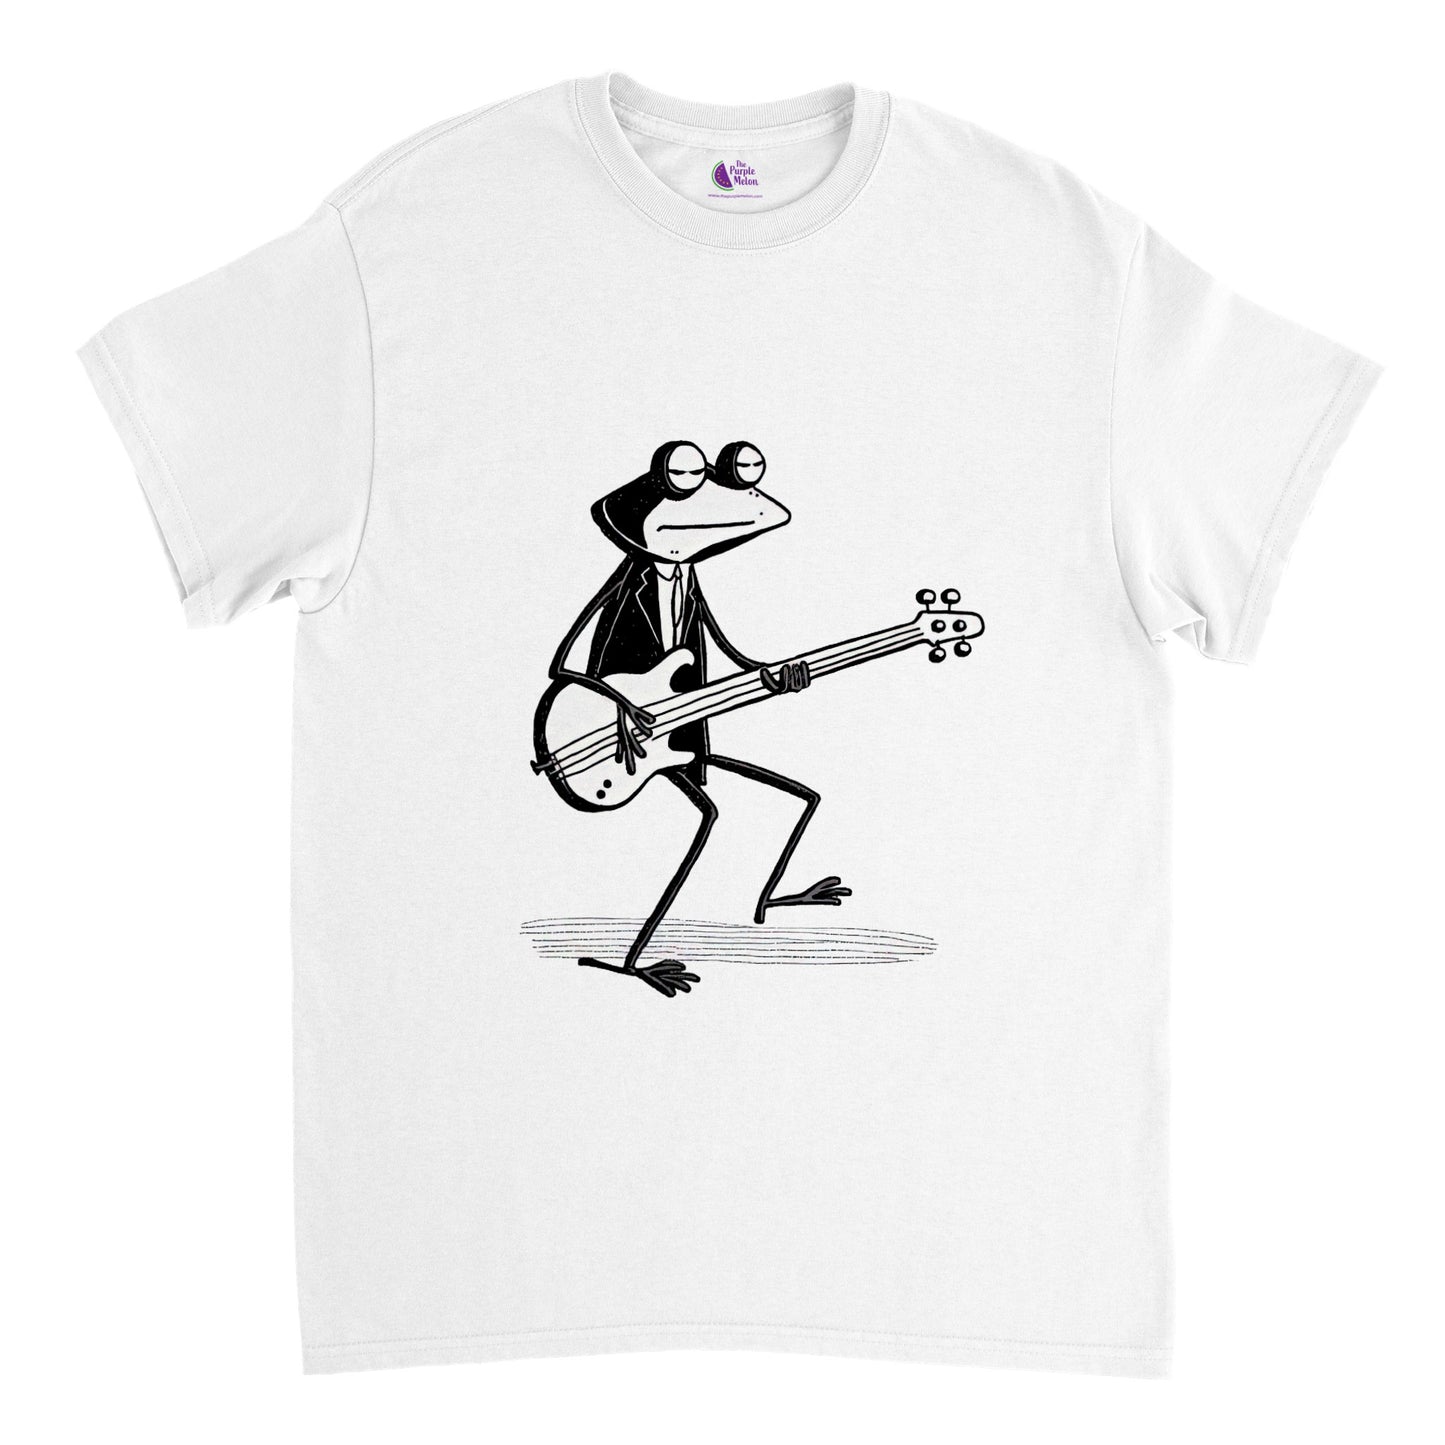 White t-shirt with a frog playing a bass guitar print